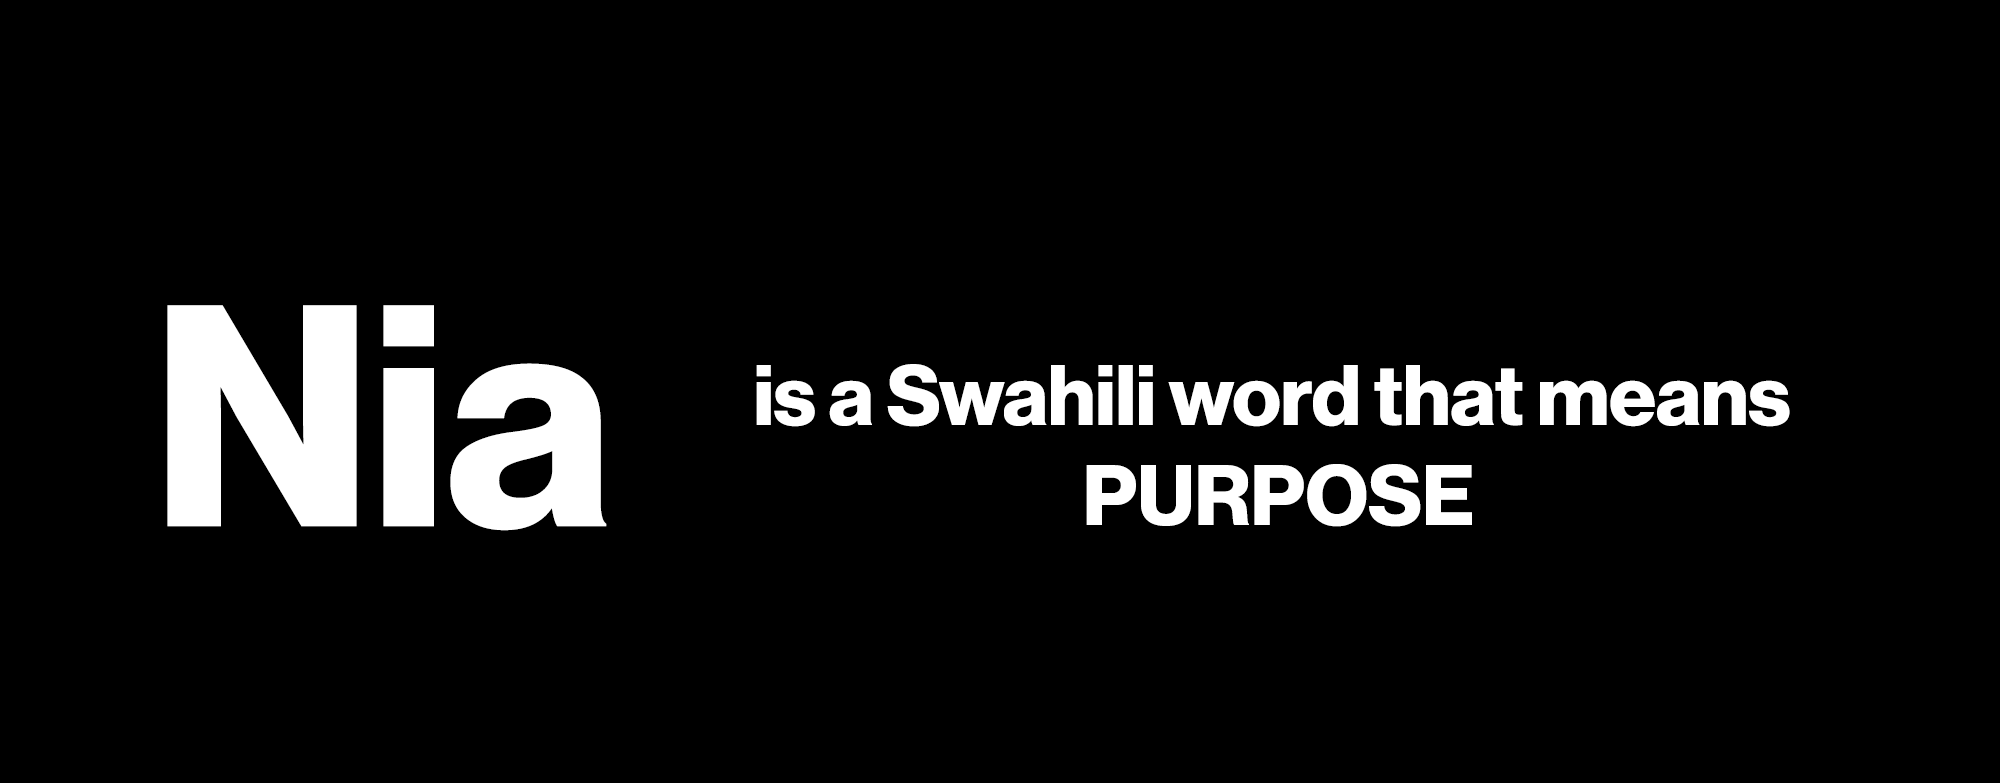 Nia is a Swahili word that means purpose